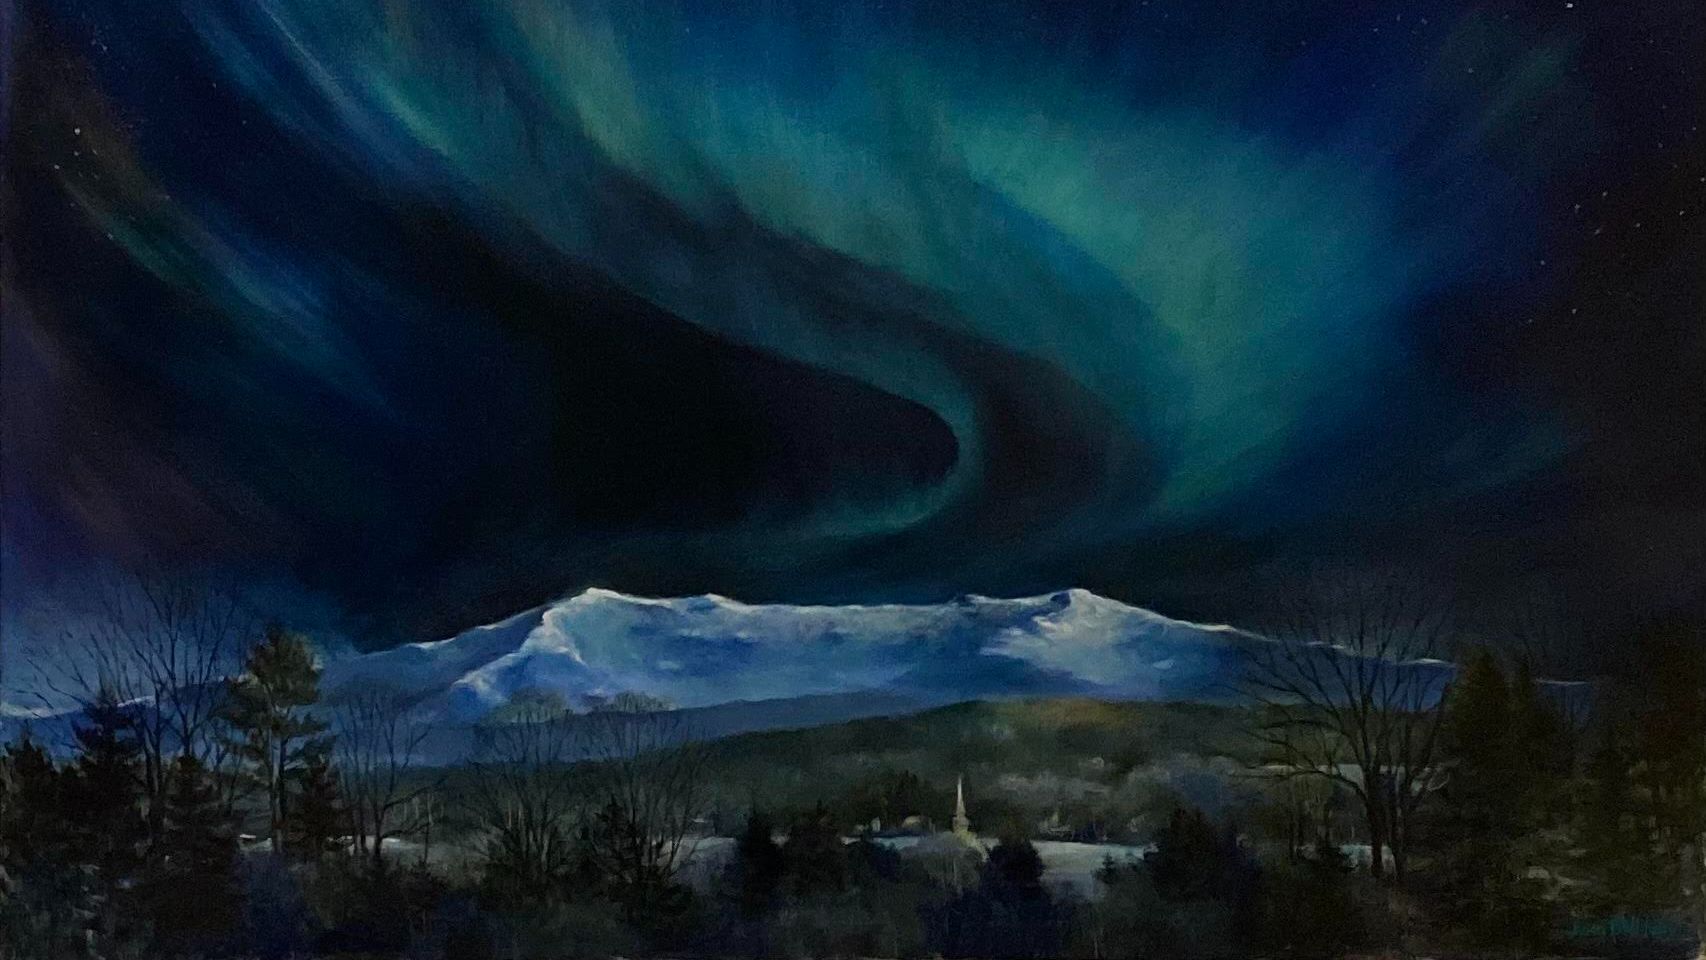 A painting of aqua swirls of northern lights sweeping across a deep blue night sky, over snow topped mountains and a village ringed by evergreen trees.